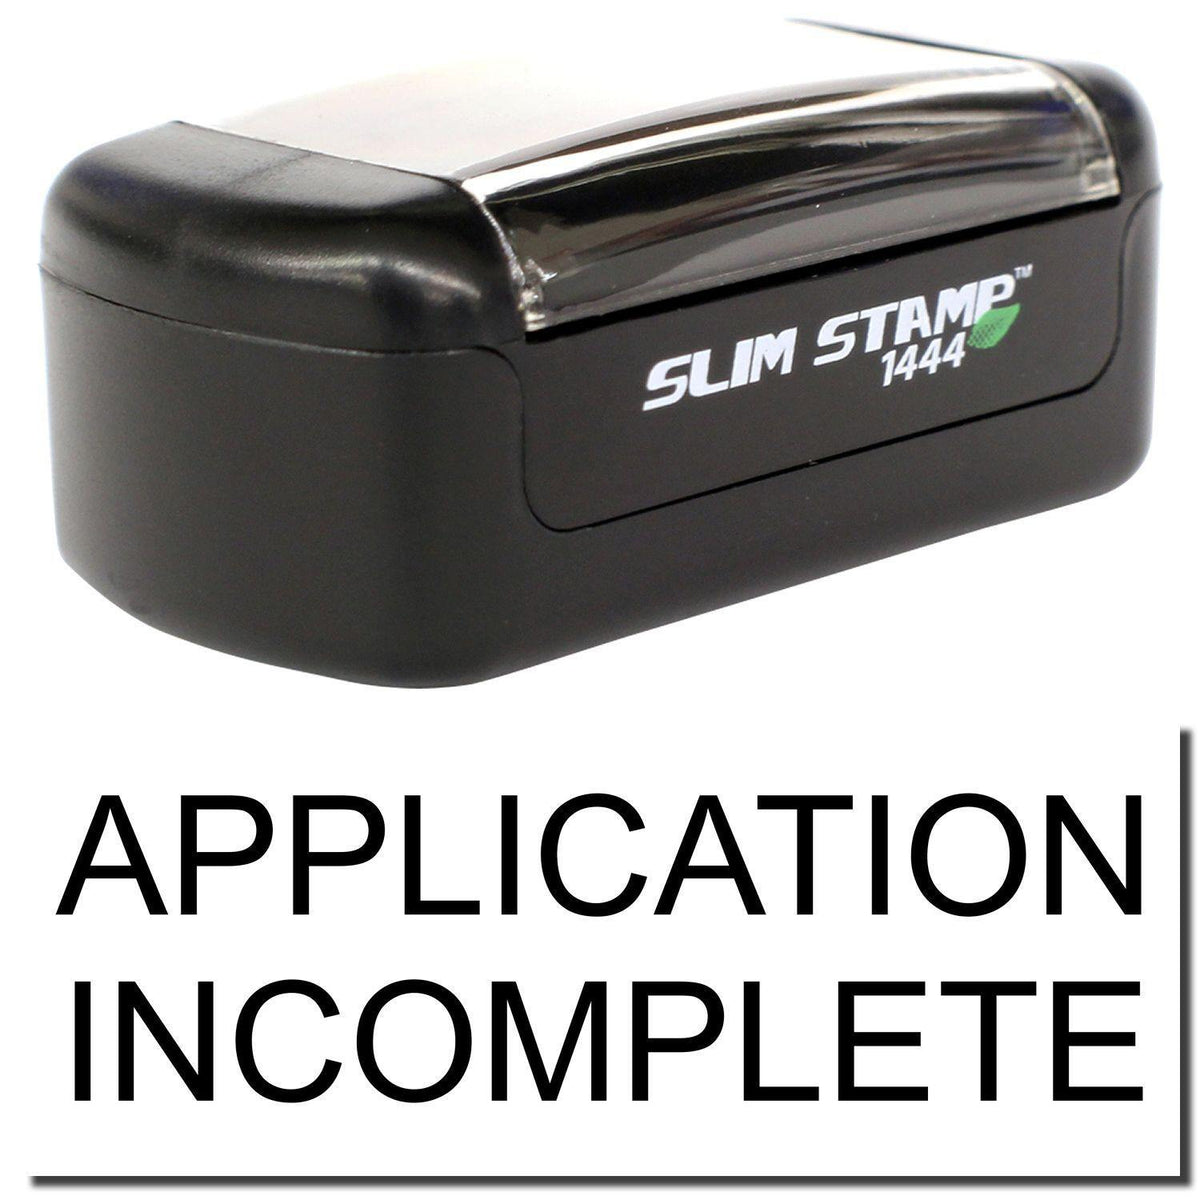 A stock office pre-inked stamp with a stamped image showing how the text &quot;APPLICATION INCOMPLETE&quot; is displayed after stamping.